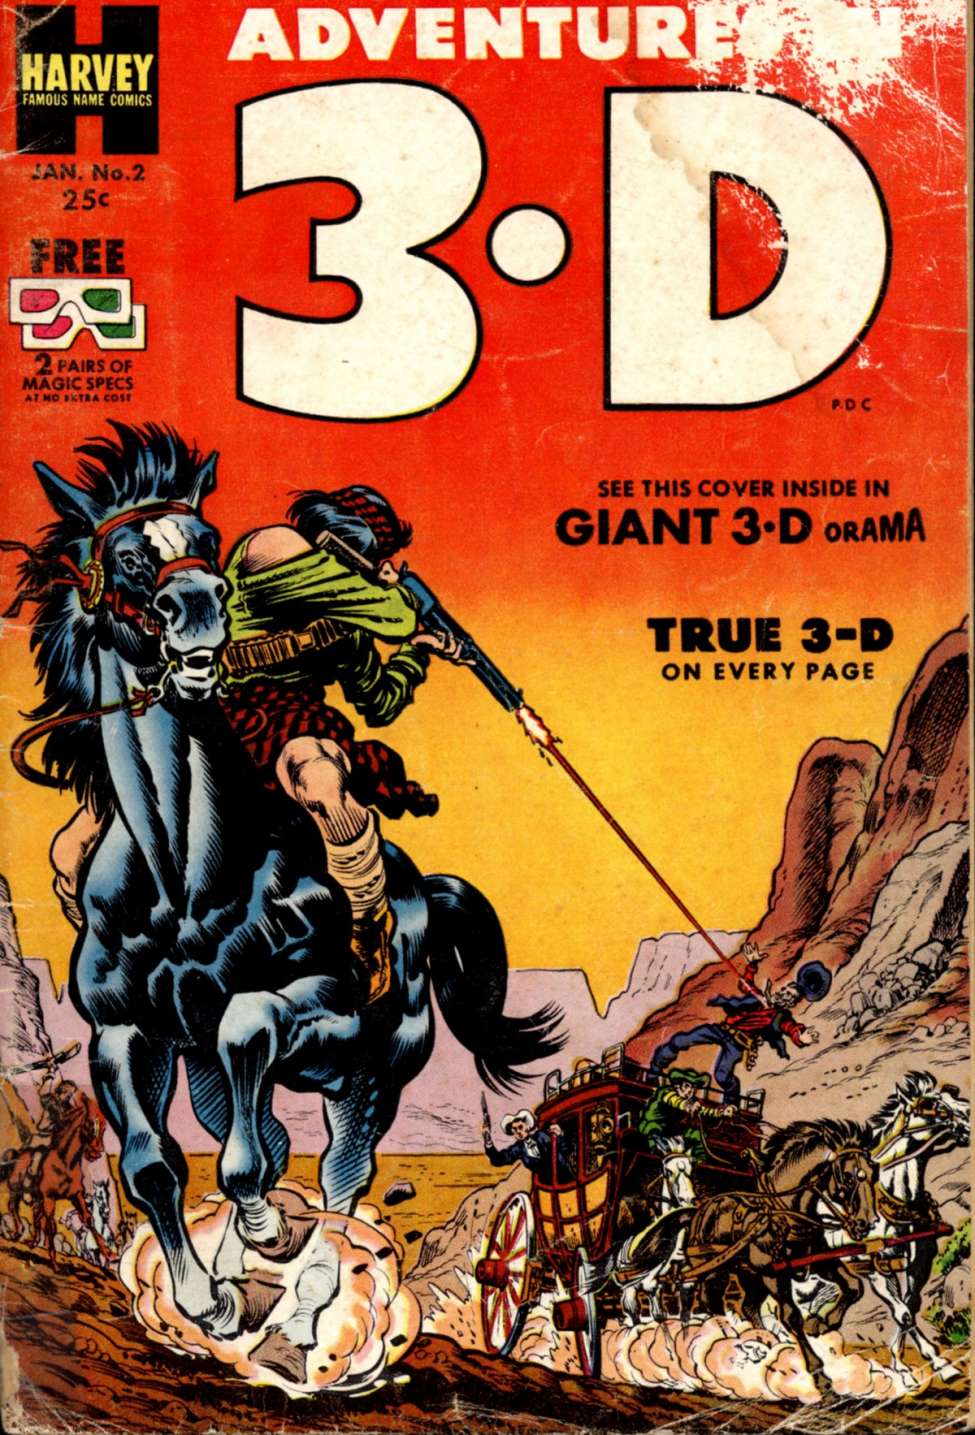 Comic Book Cover For Adventures in 3-D 2